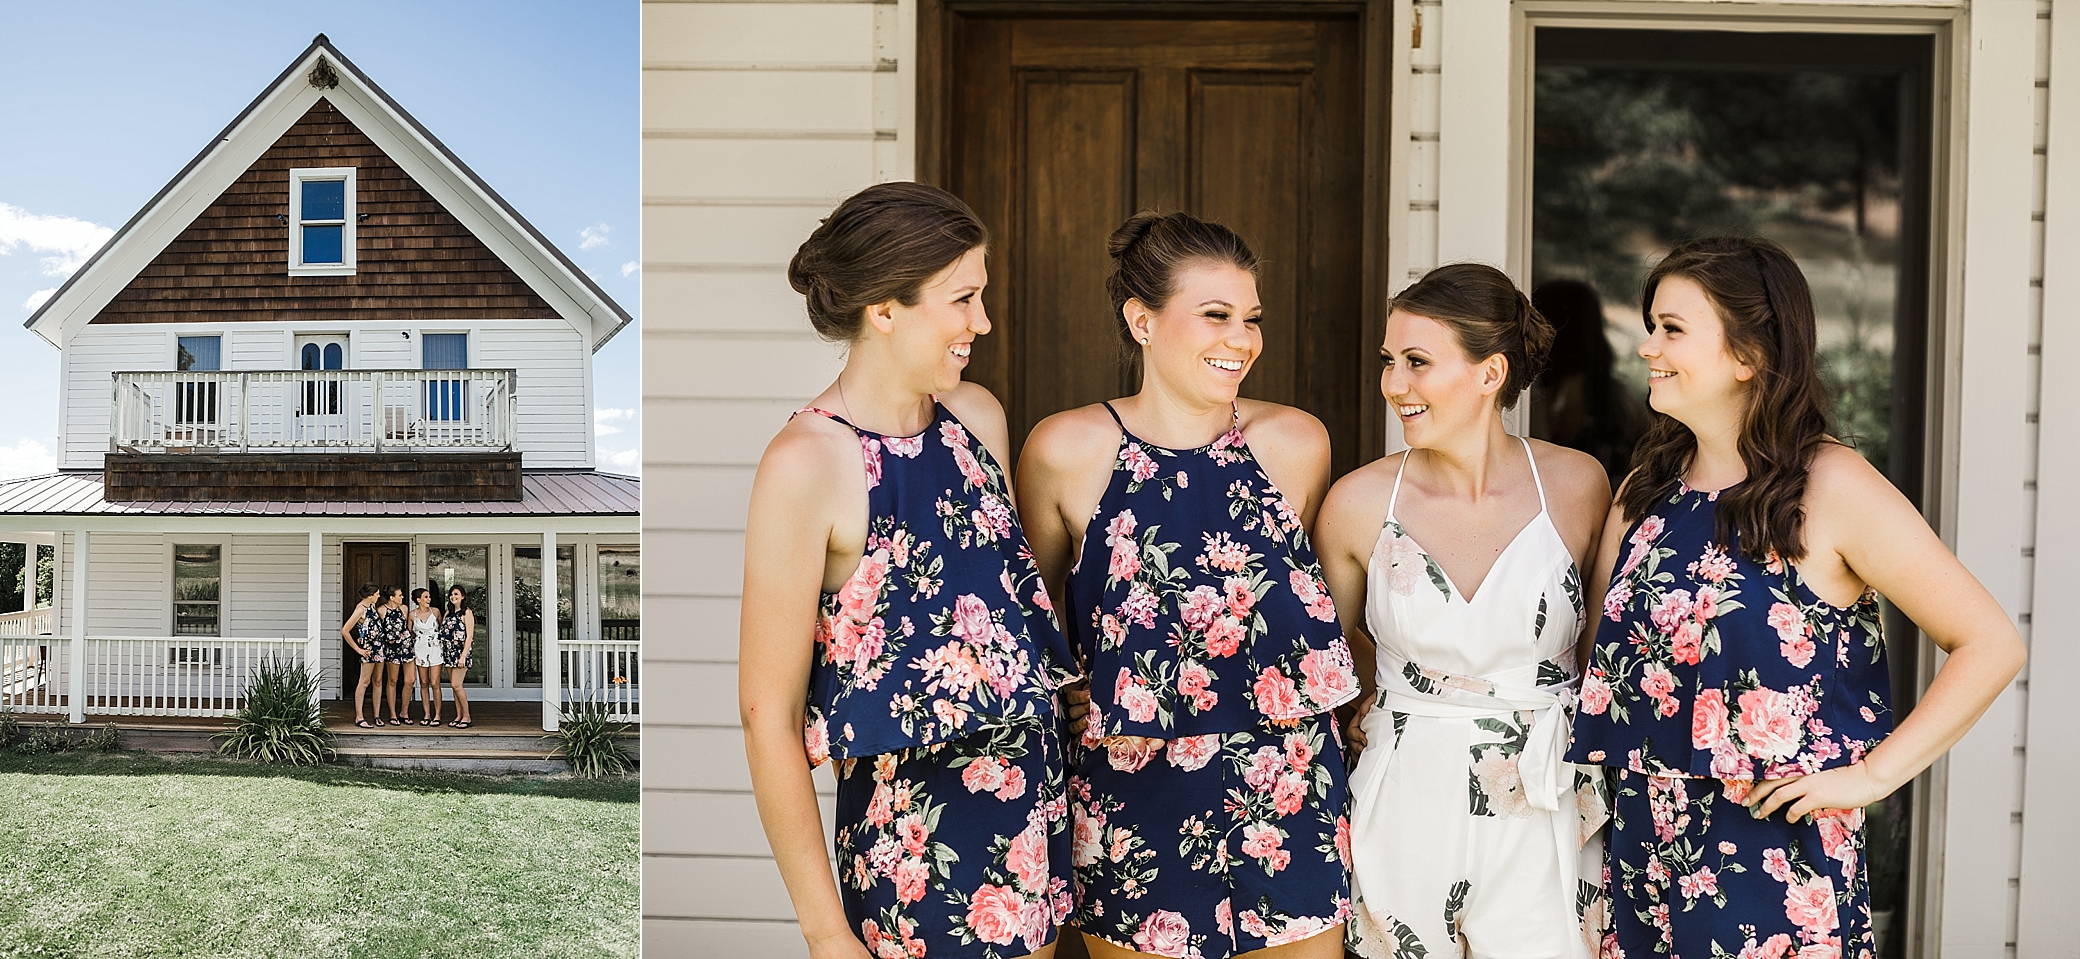 Bridal party getting ready at the Cattle Barn in Cle Elum, Washington | Megan Montalvo Photography 